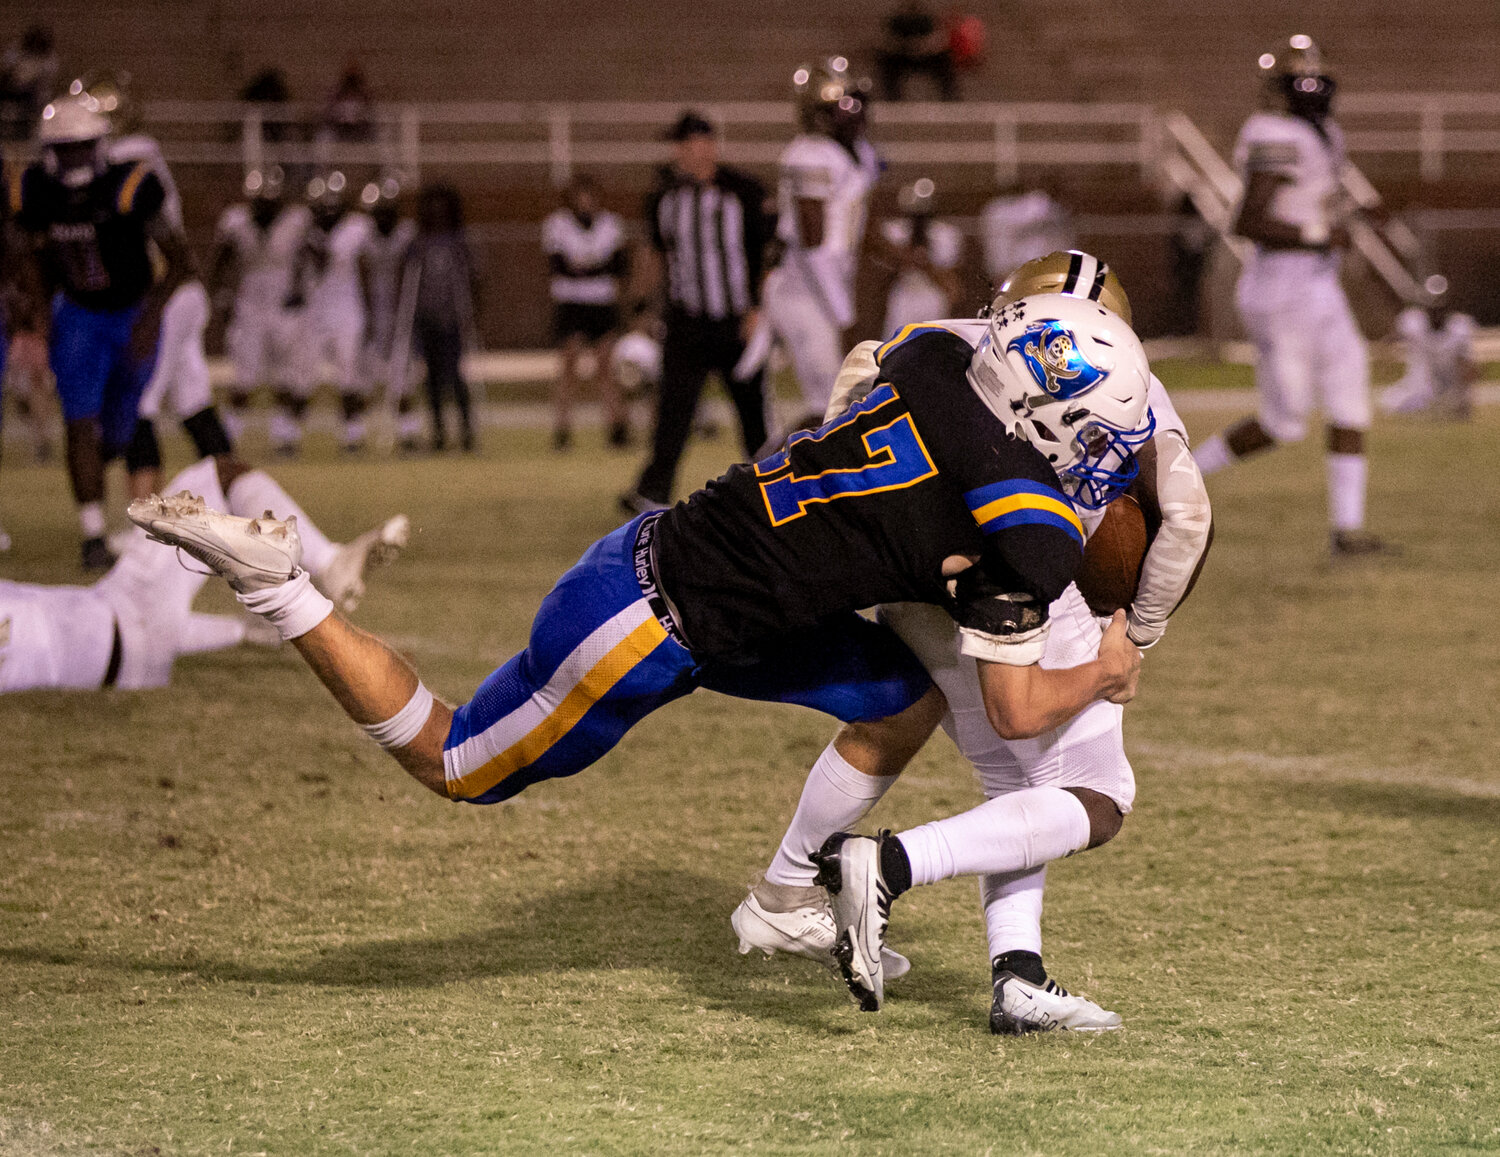 Pirate senior Dixon Davis pulls down Warrior junior Terrance Gray during the second half of Friday’s Class 7A Region 1 game between Fairhope and Davidson on W.C. Majors Field. The Warriors went on to earn a 42-10 victory.